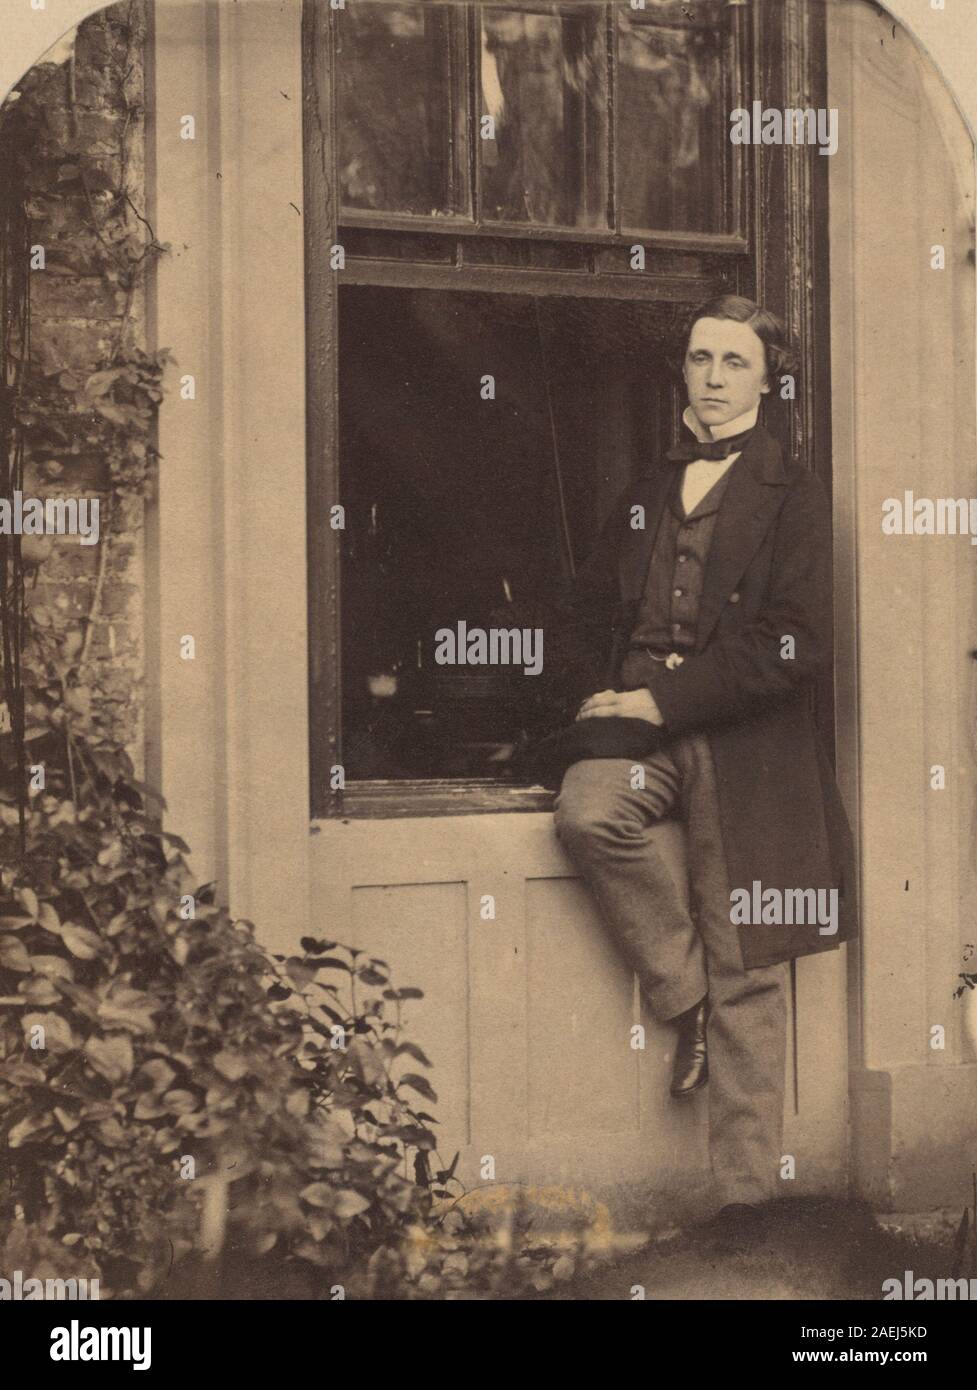 Lewis Carroll, Lewis Carroll Seated on a Windowsill of the Old Rectory at Croft, Darlington, Yorkshire, 1857 Lewis Carroll Seated on a Windowsill of the Old Rectory at Croft, Darlington, Yorkshire; 1857date Stock Photo